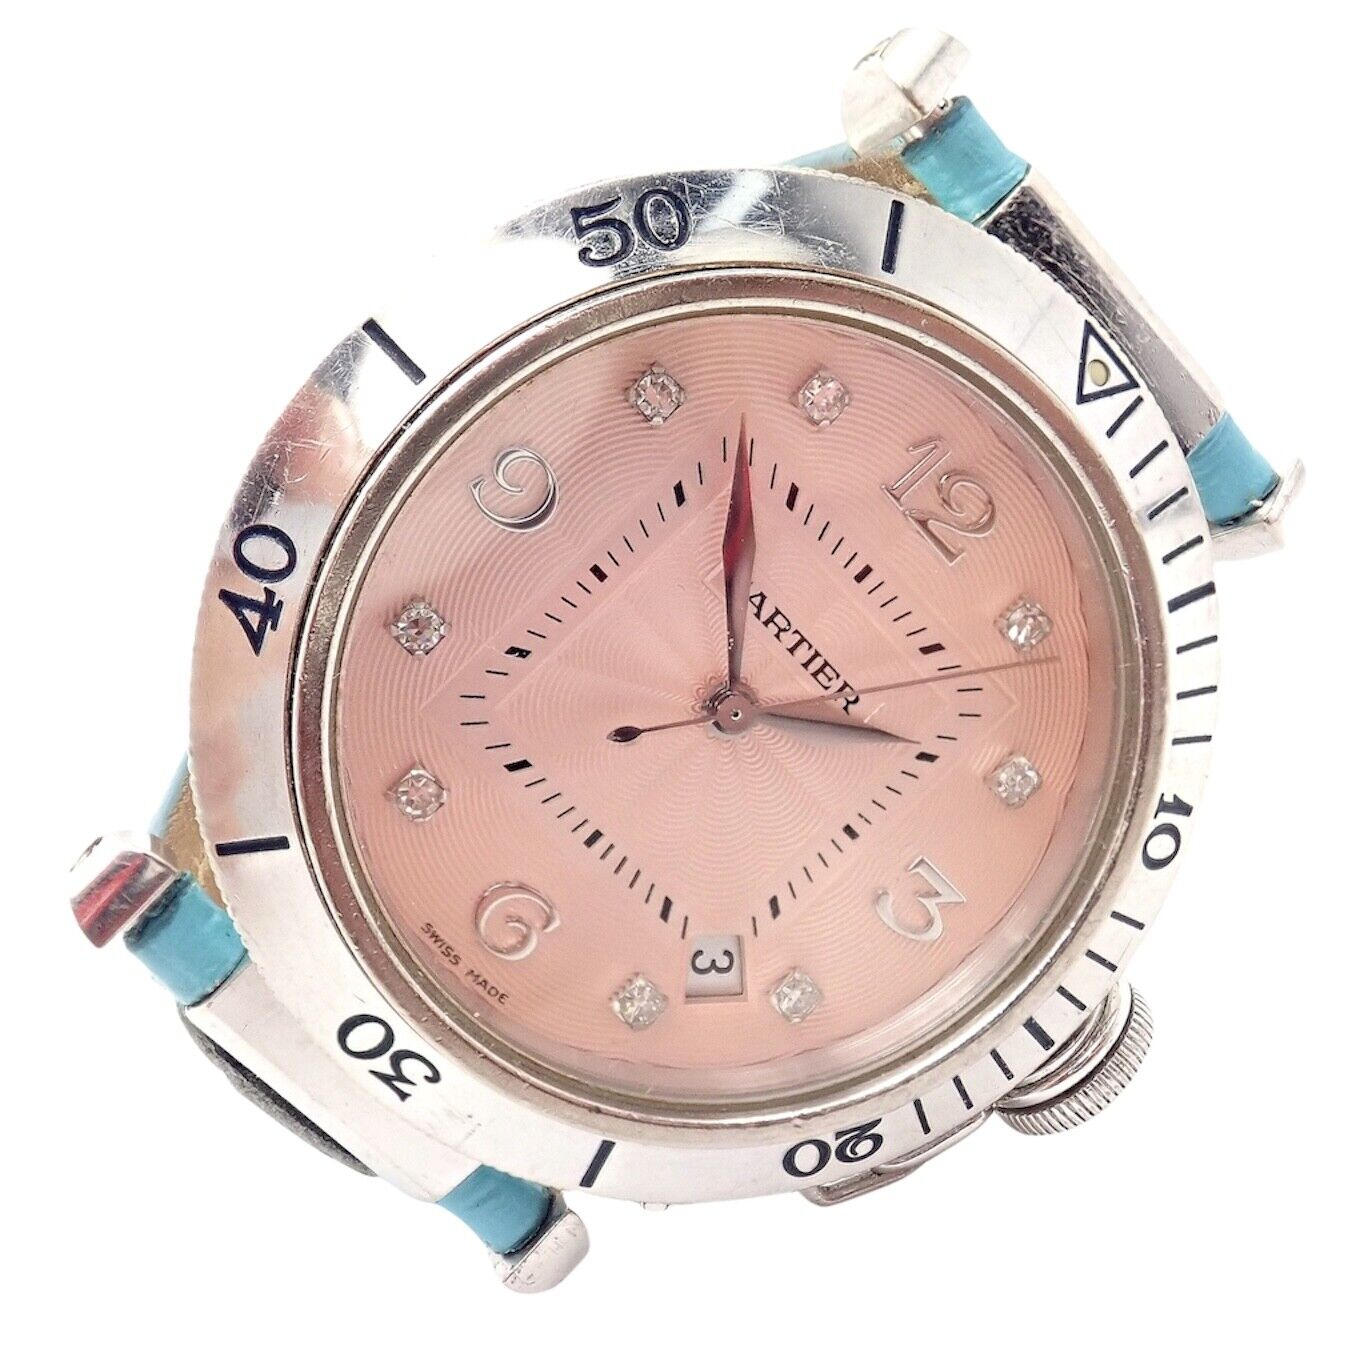 Cartier Jewelry & Watches:Watches, Parts & Accessories:Watches:Wristwatches Authentic! Cartier 18k White Gold Pasha Pink Dial Miami Diamond Automatic Watch